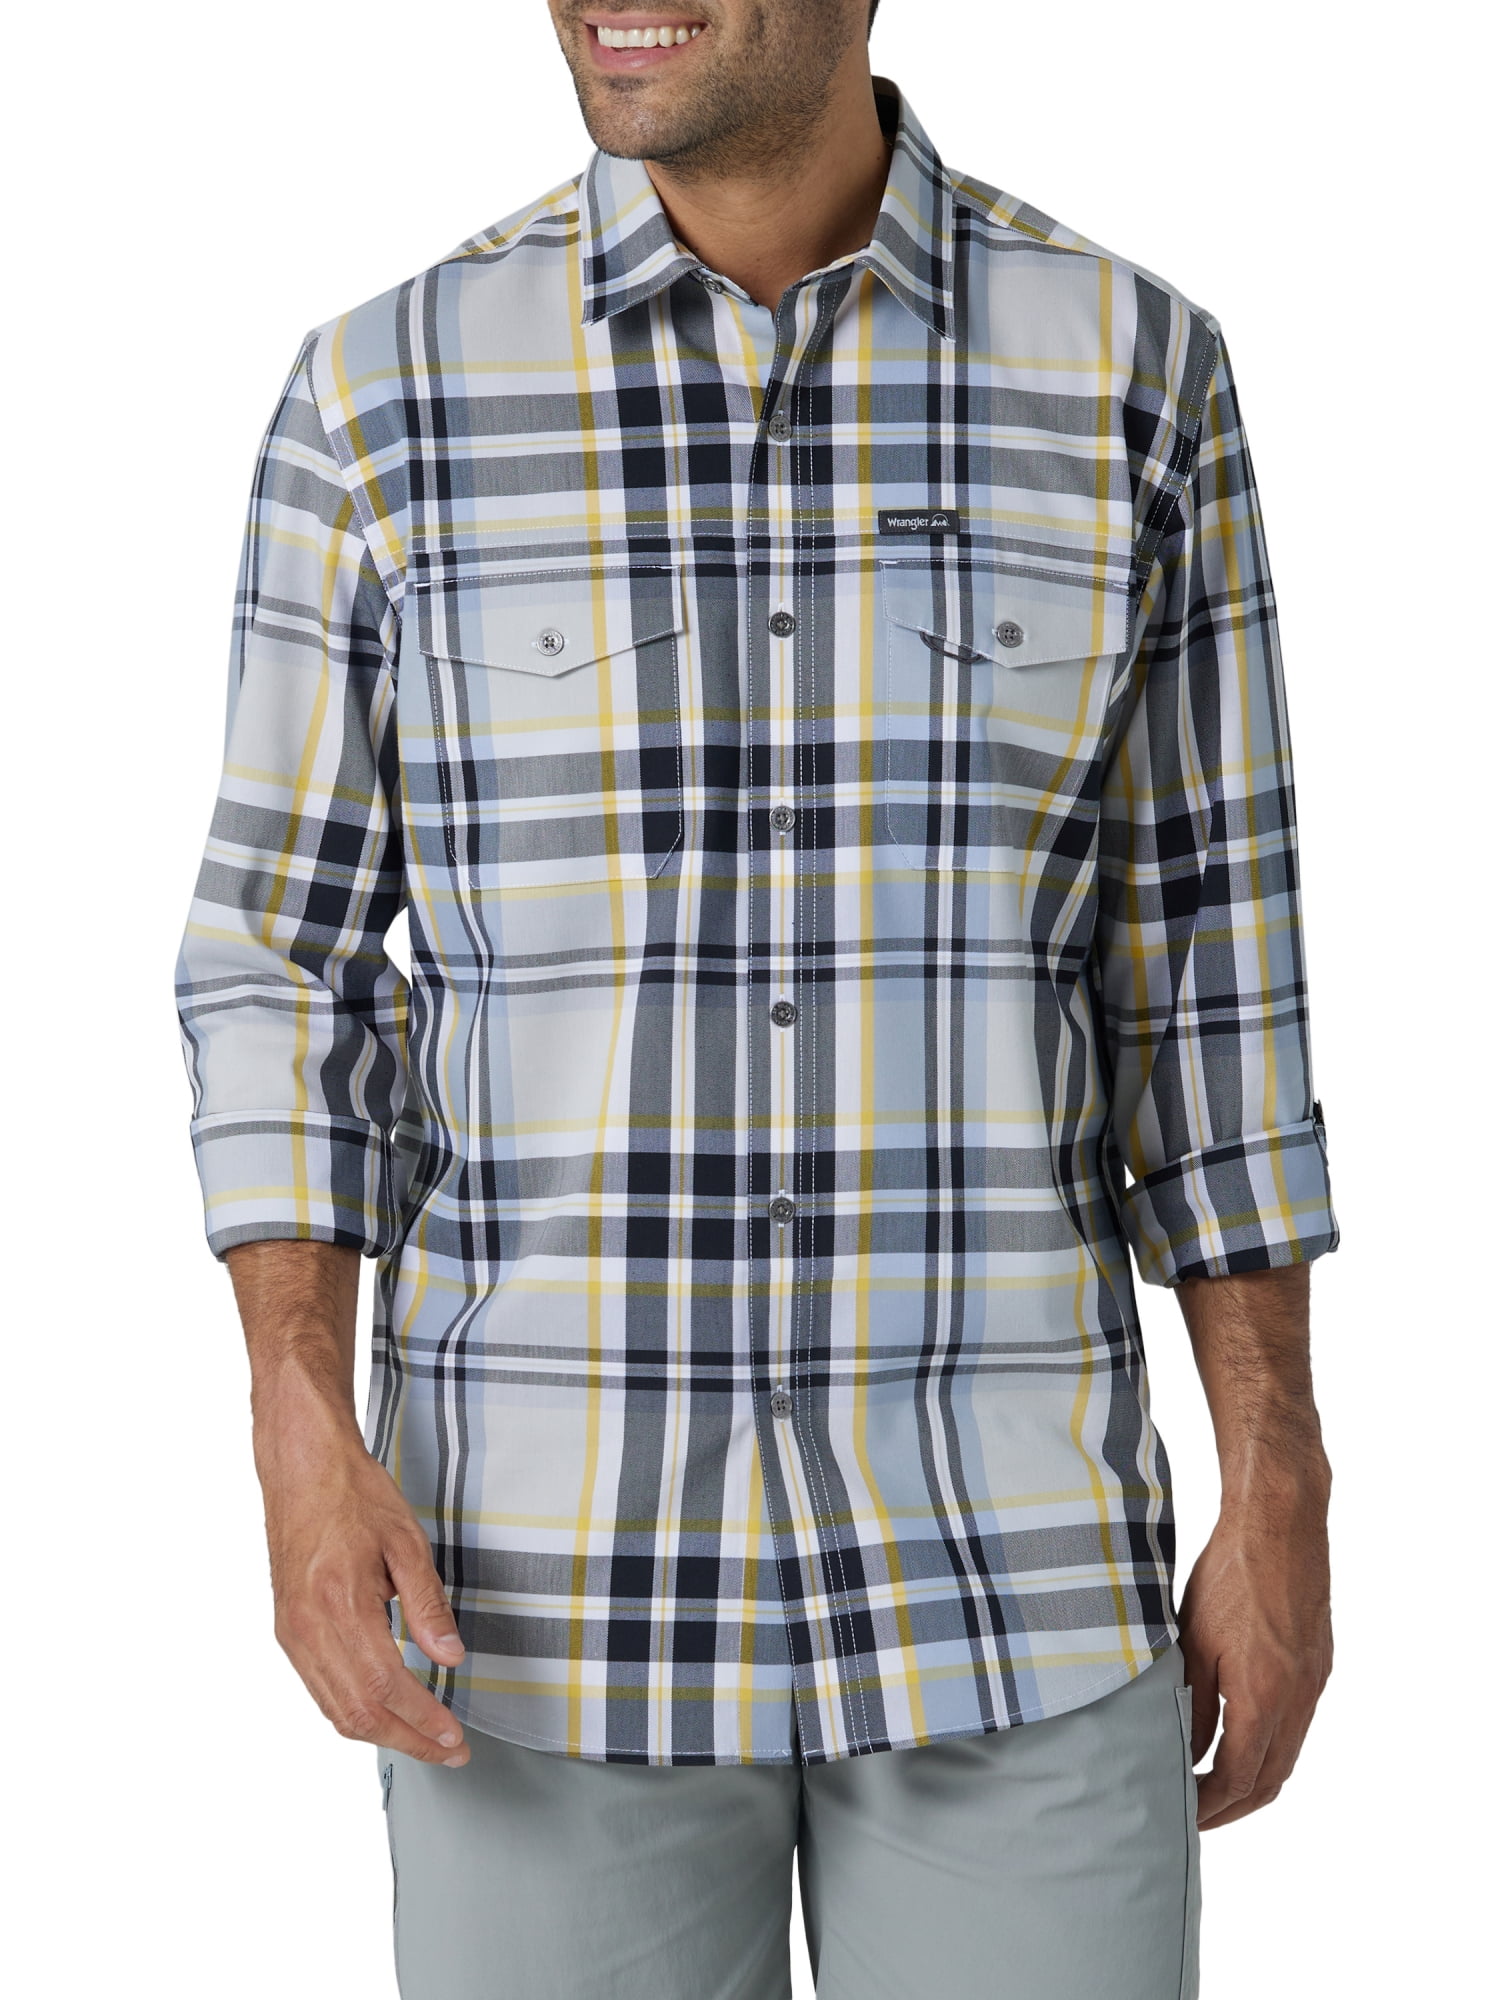 Wrangler Men's Outdoor Long Sleeve Shirt with UPF 30+ Protection, Sizes  S-5XL 